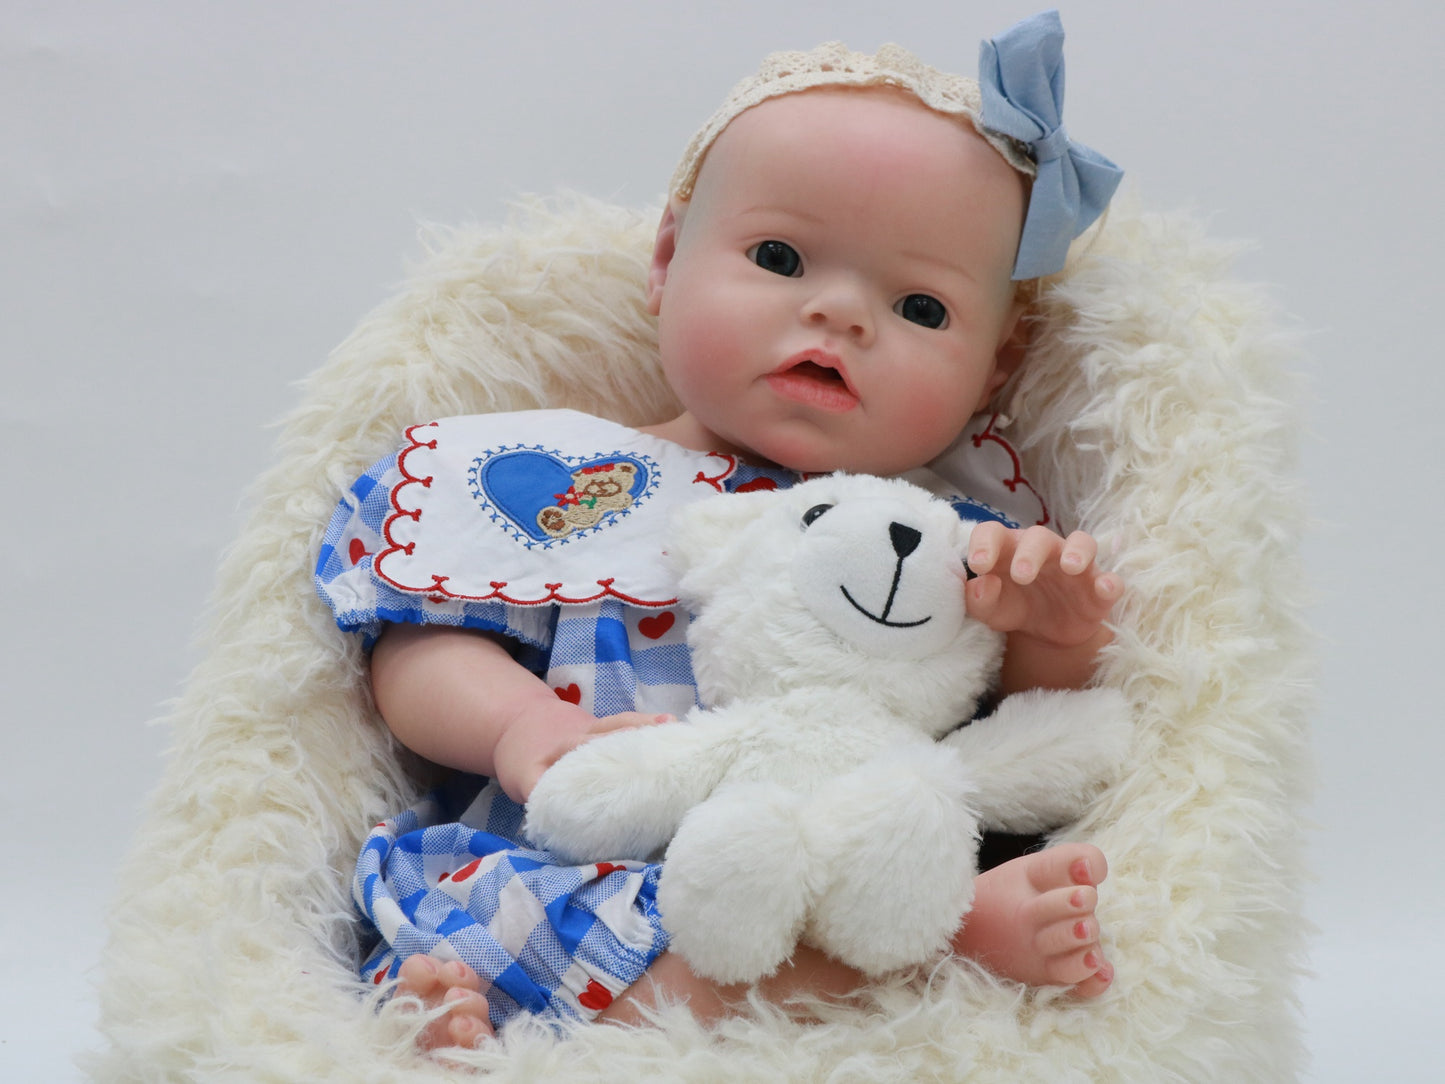 20INCH 50CM Painted Silicone Dolls Full Solid Silicone Bebe Reborn Doll Can Drink Milk & Pee Dolls De Silicone Inteiro